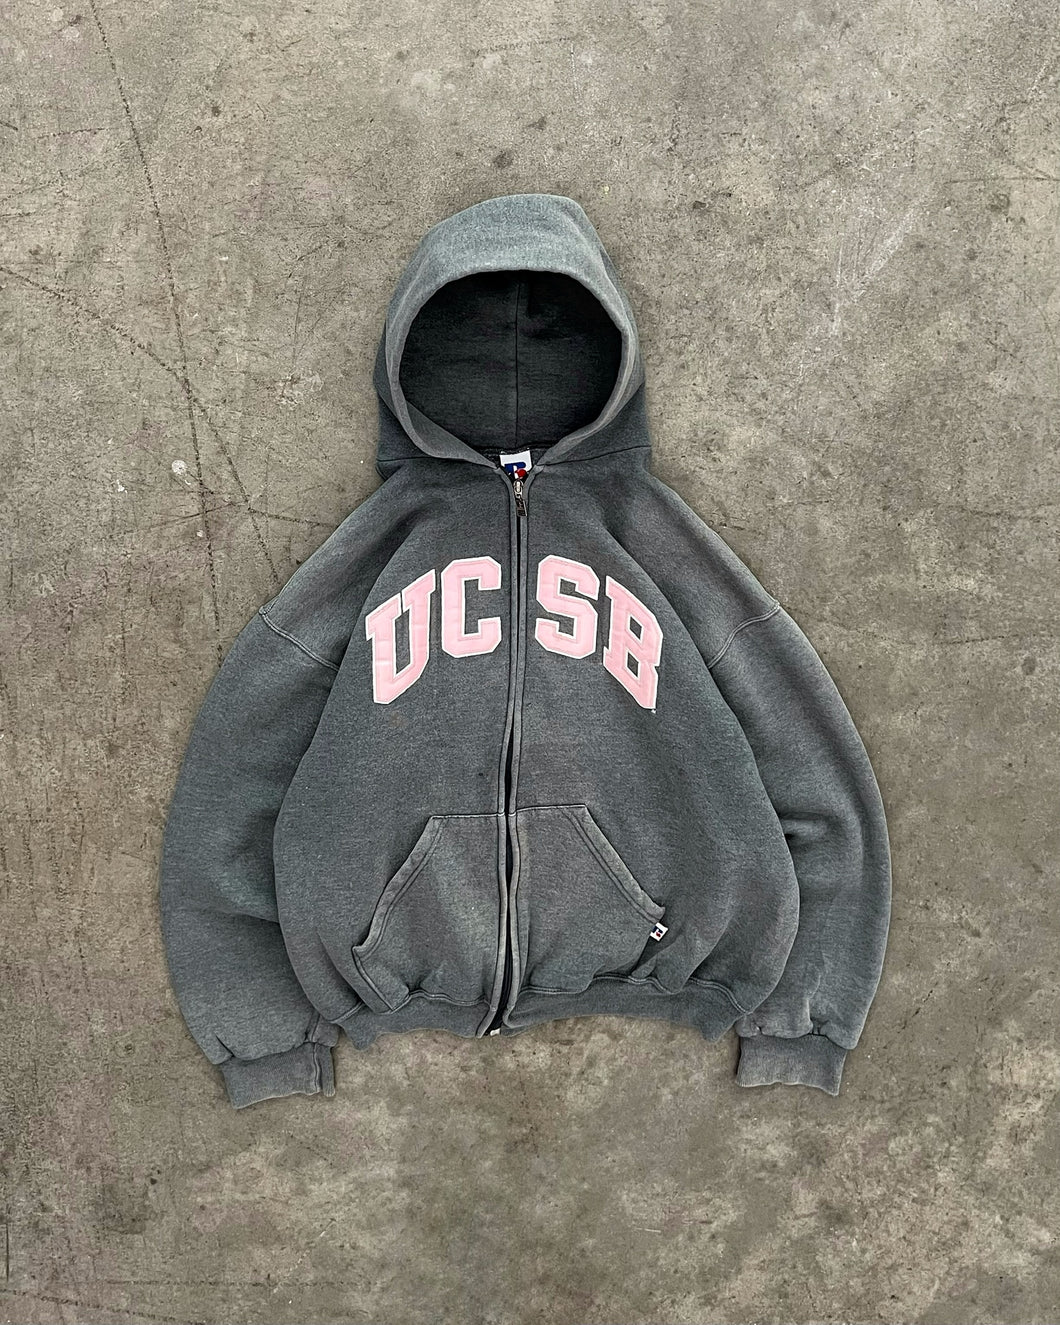 SUN FADED CEMENT GREY “UCSB” ZIP UP HOODIE - 1990S